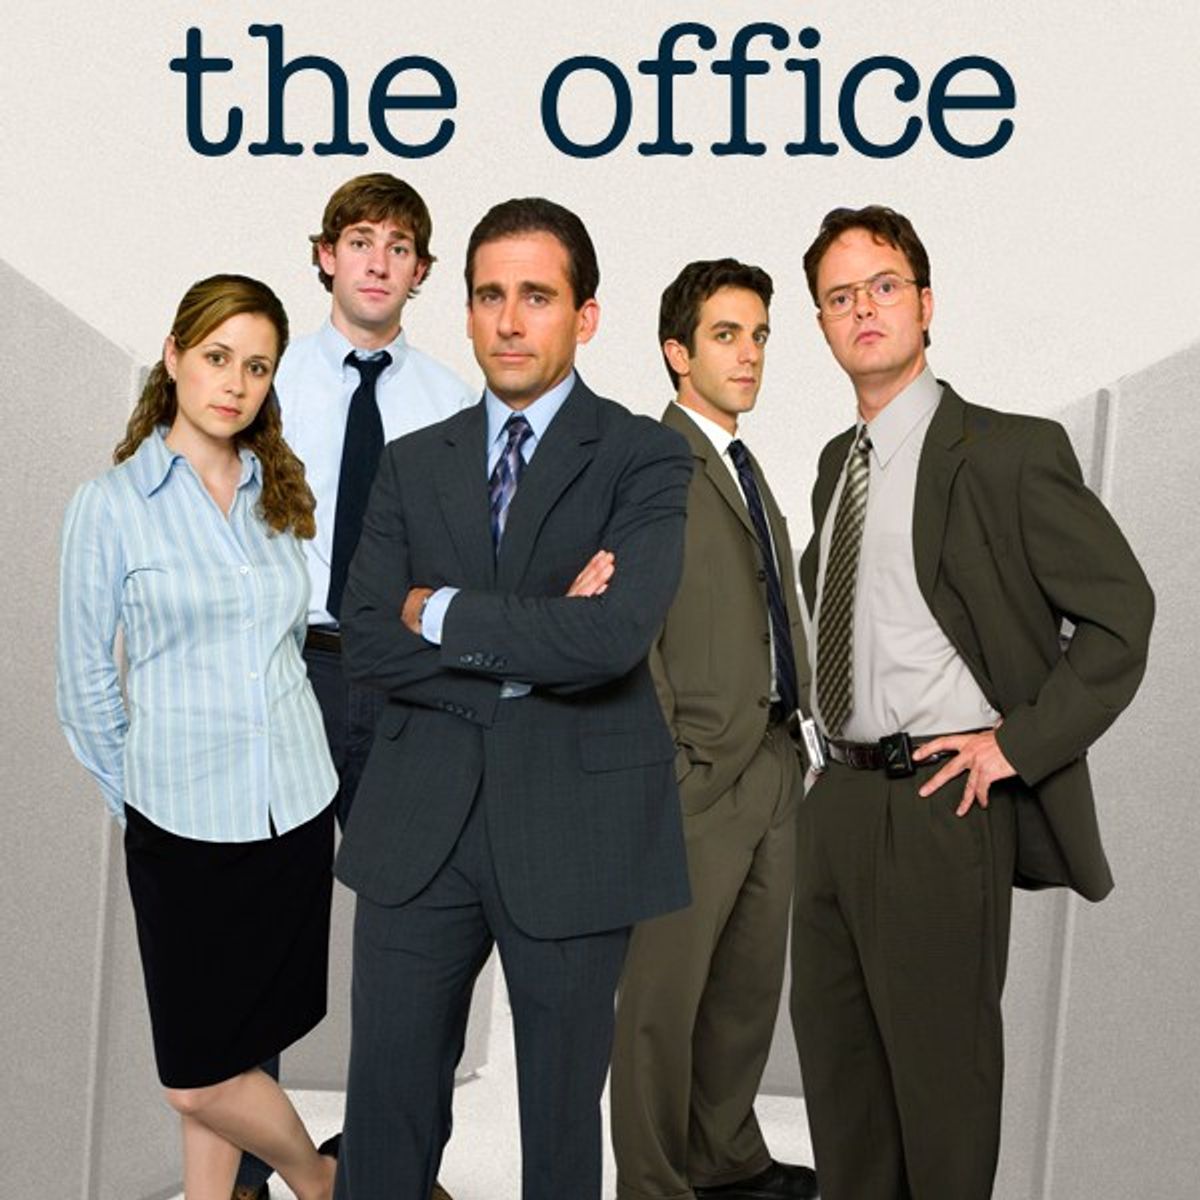 10 Feelings About Your Ex as Told by "The Office"